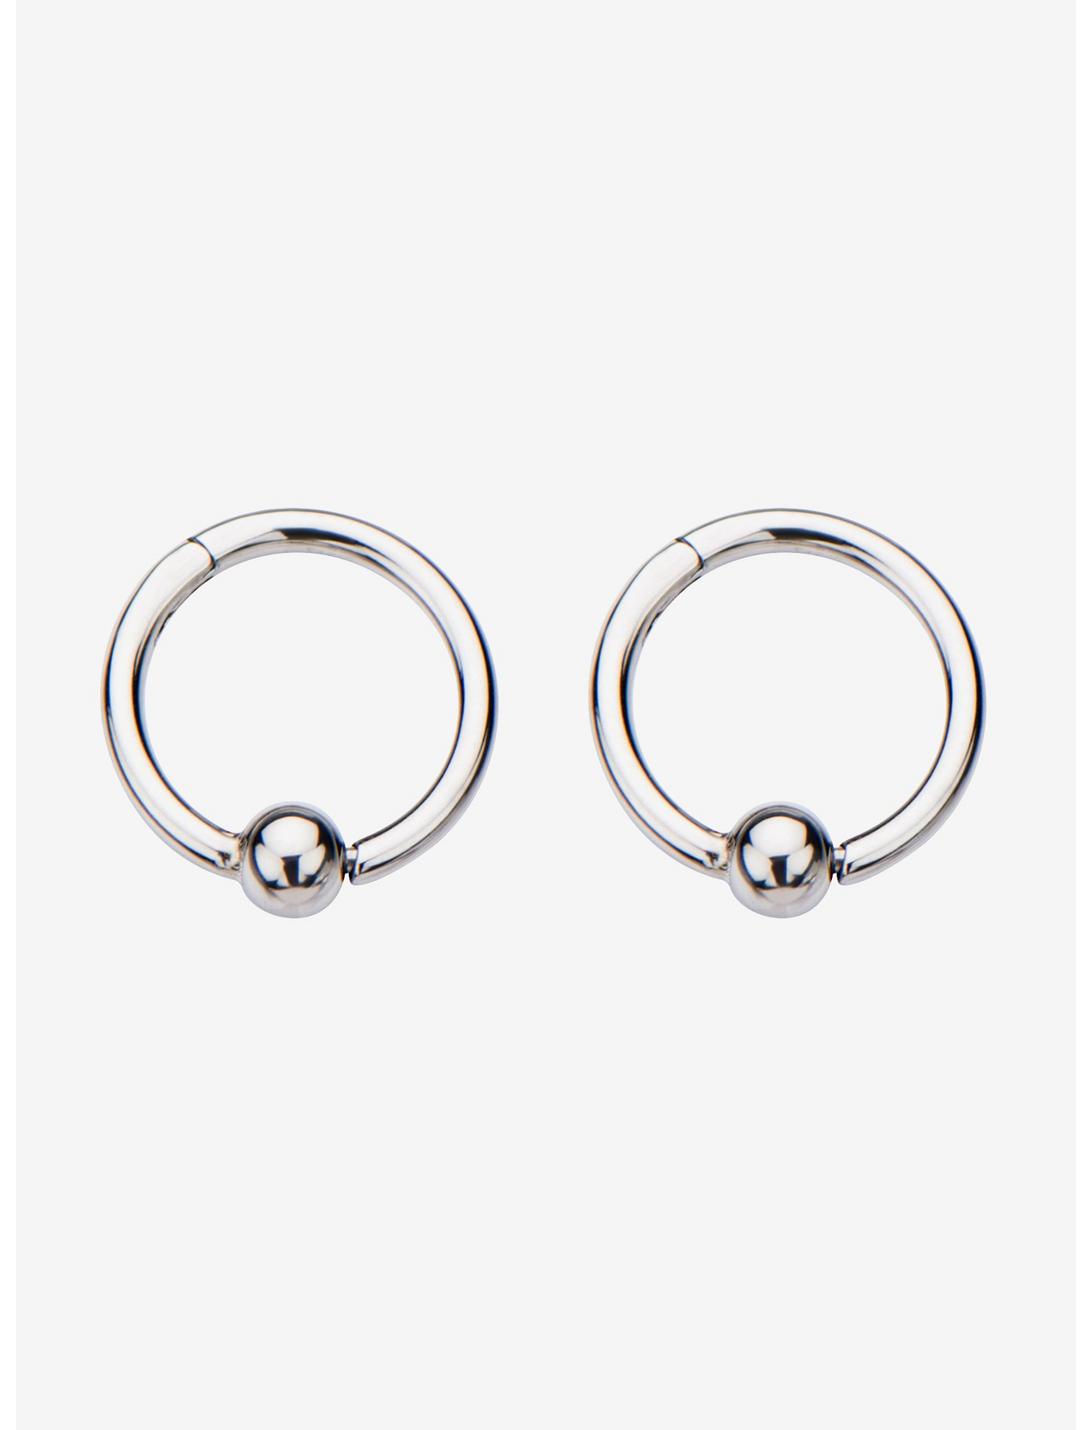 3Mm Ball Attached Hinged Segment Stainless Steel Rings Pair, , hi-res